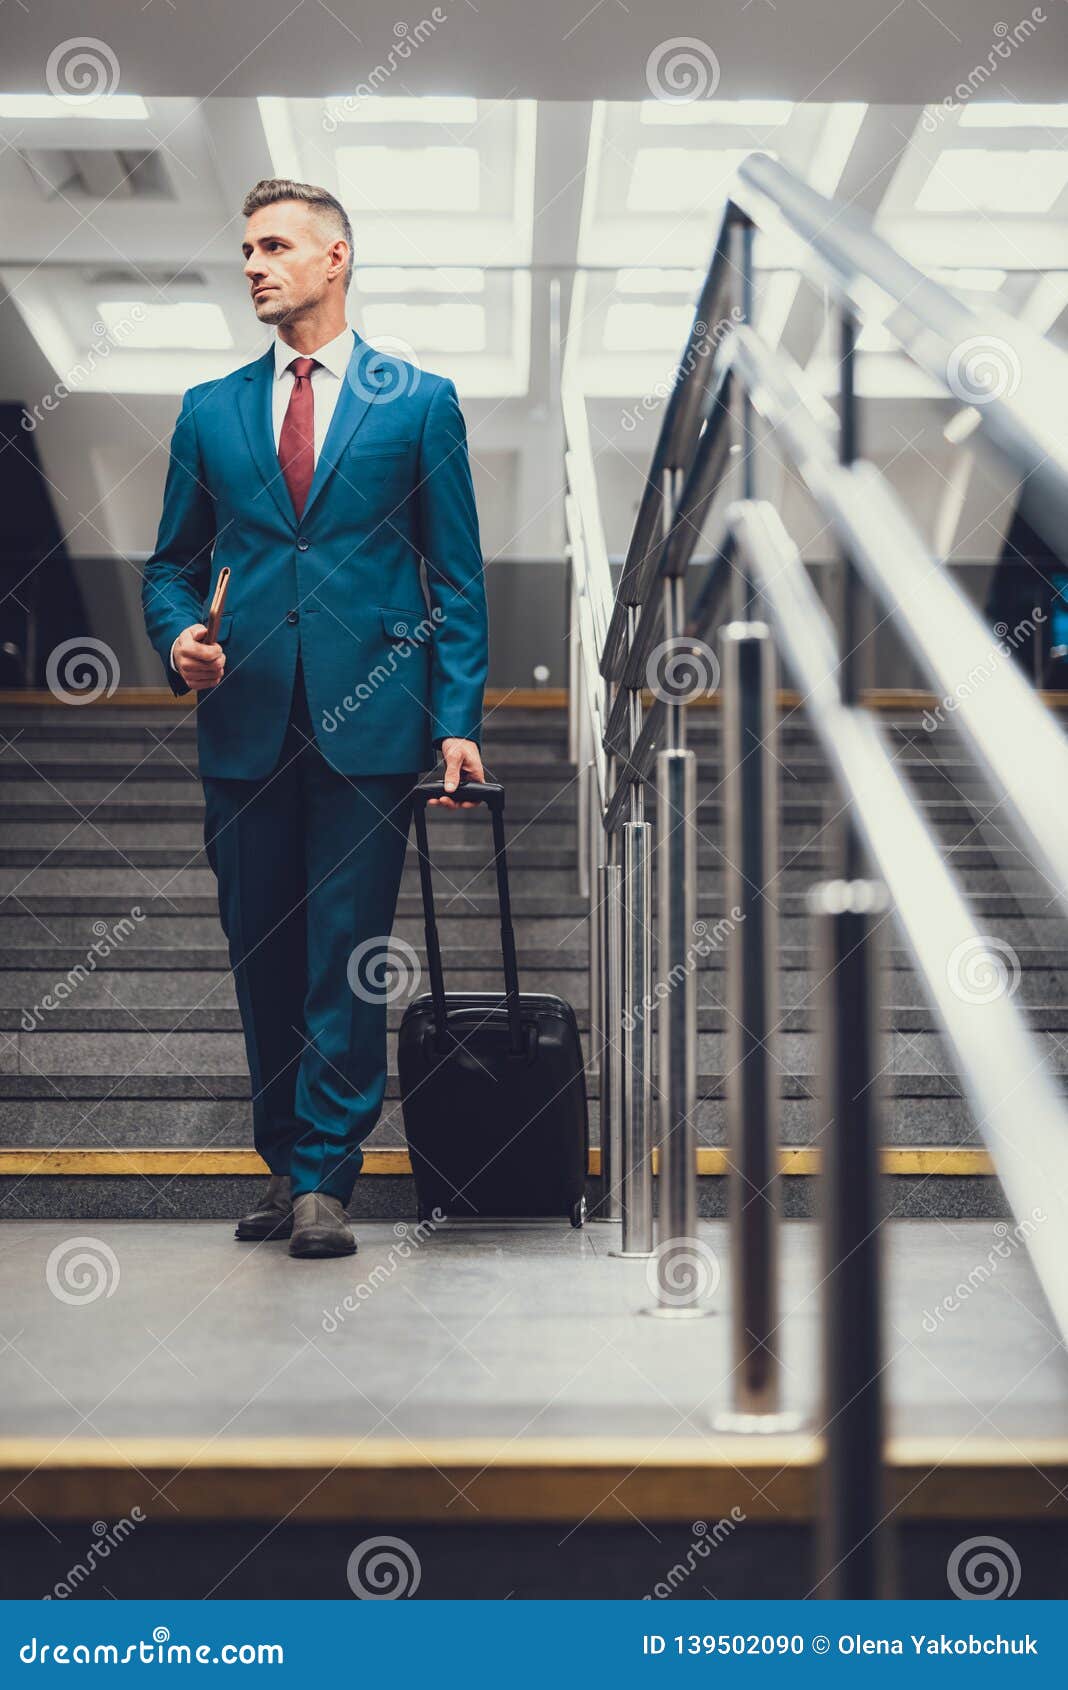 Man with Document and Suitcase Walking on Stairs Stock Photo - Image of